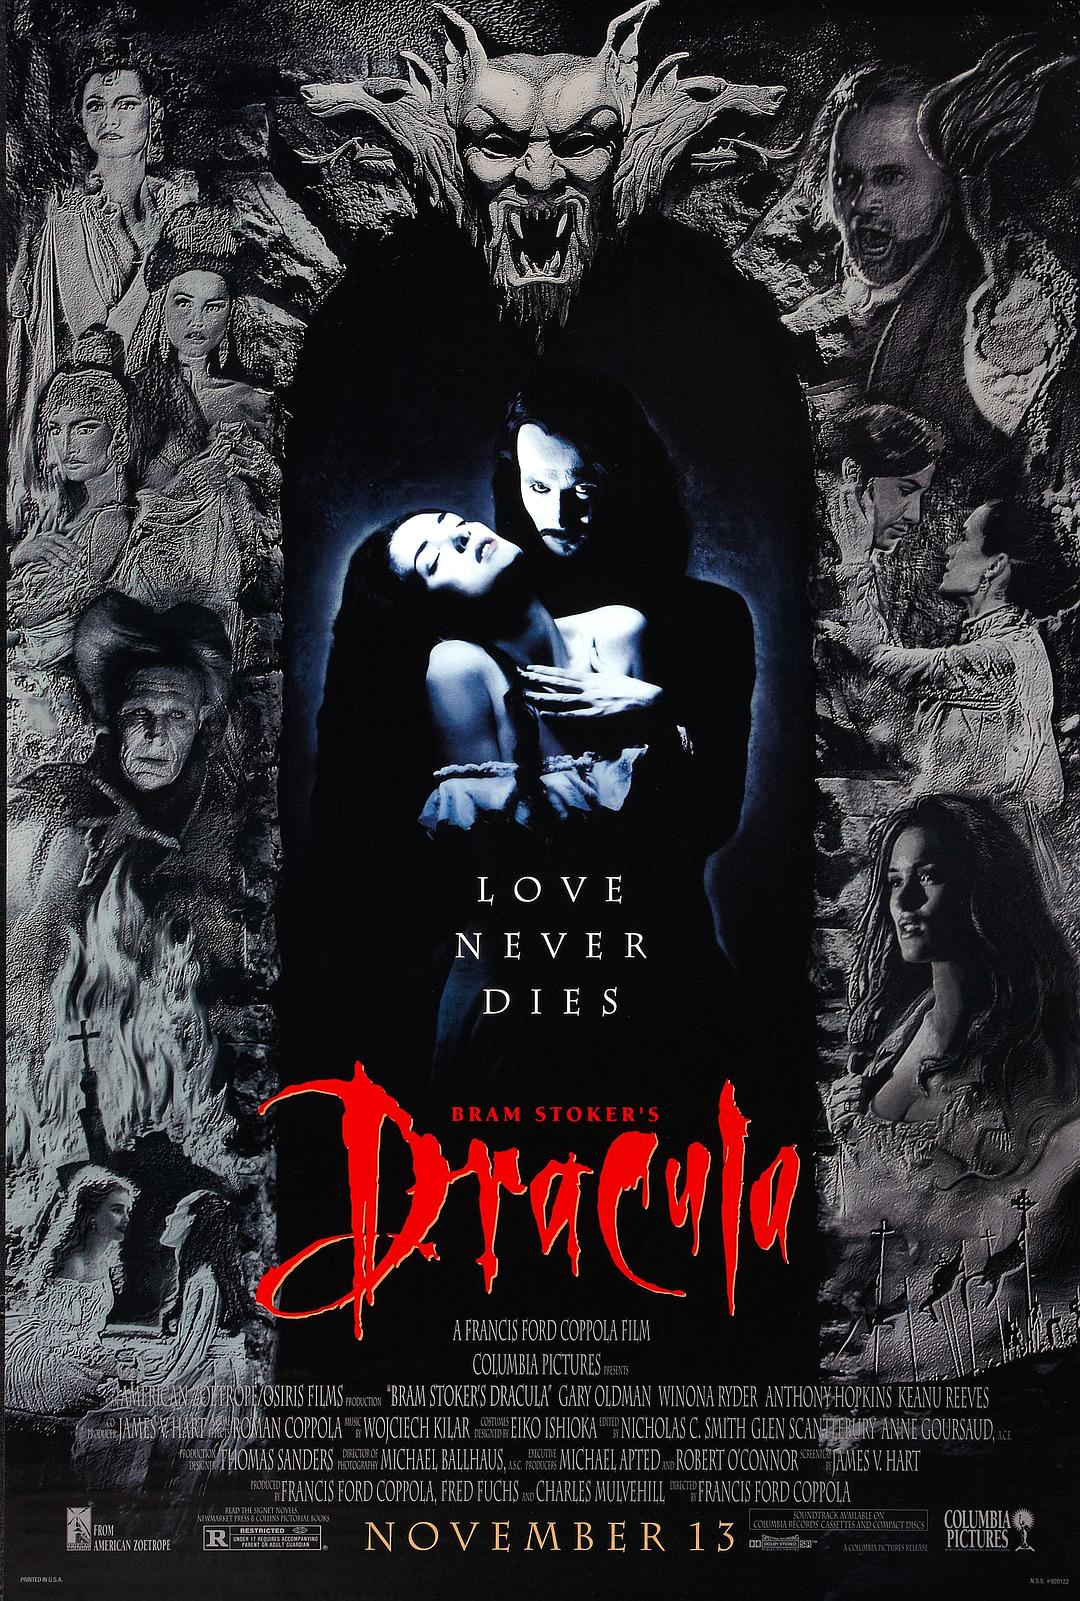 İ Bram.Stokers.Dracula.1992.REMASTERED.1080p.BluRay.X264-AMIABLE 12.01GB-1.png